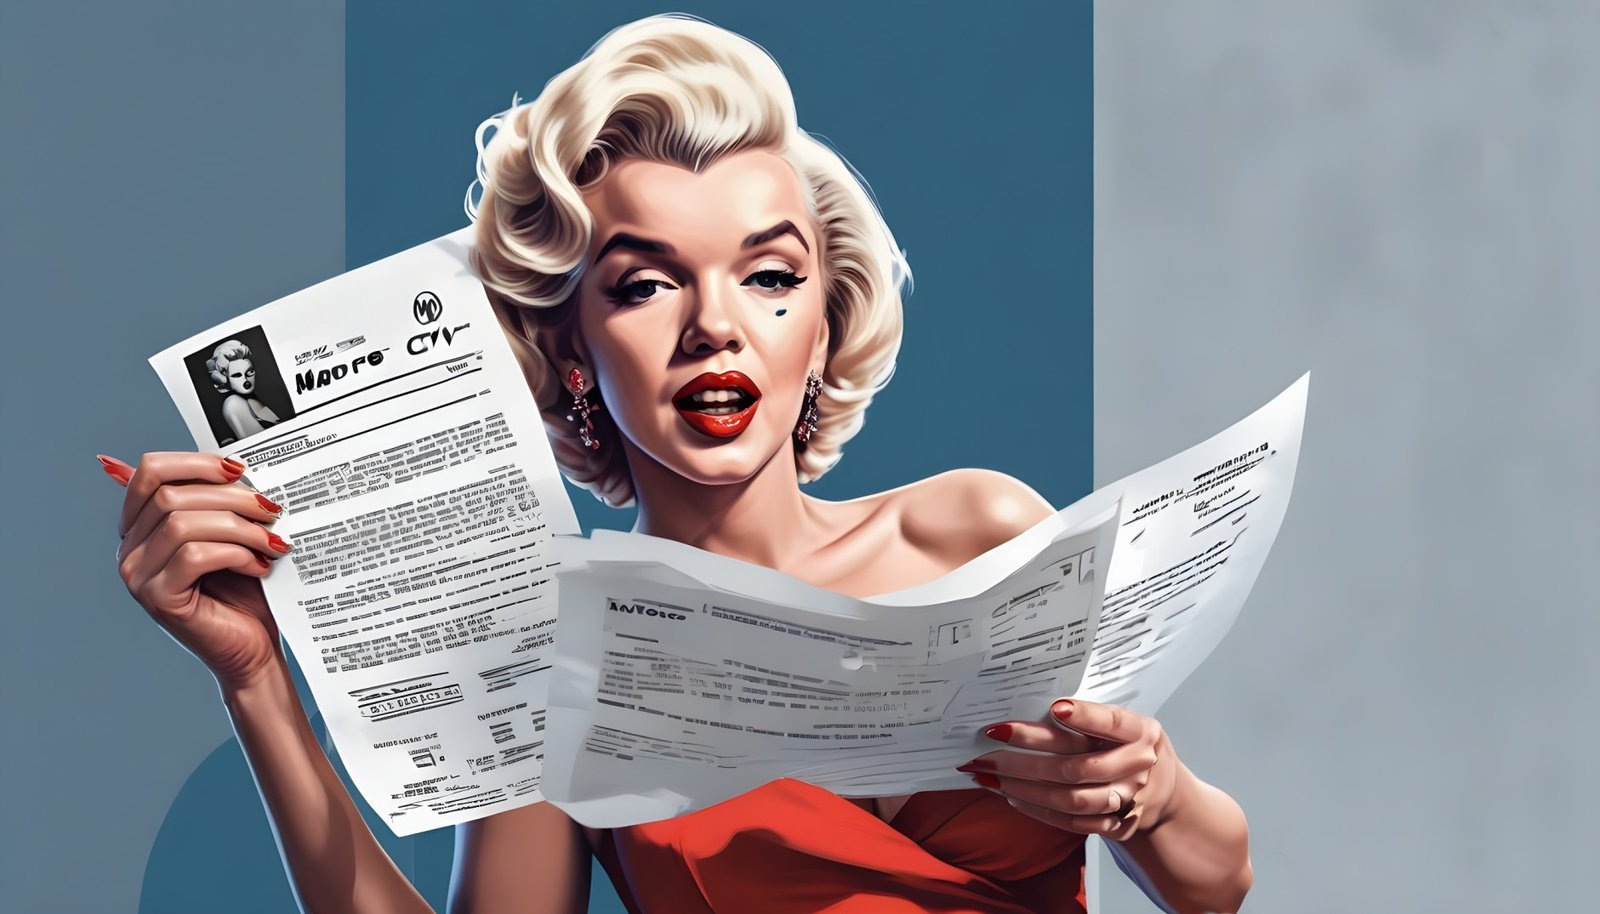 How to write the best entertainment industry resume | 15 industry secrets